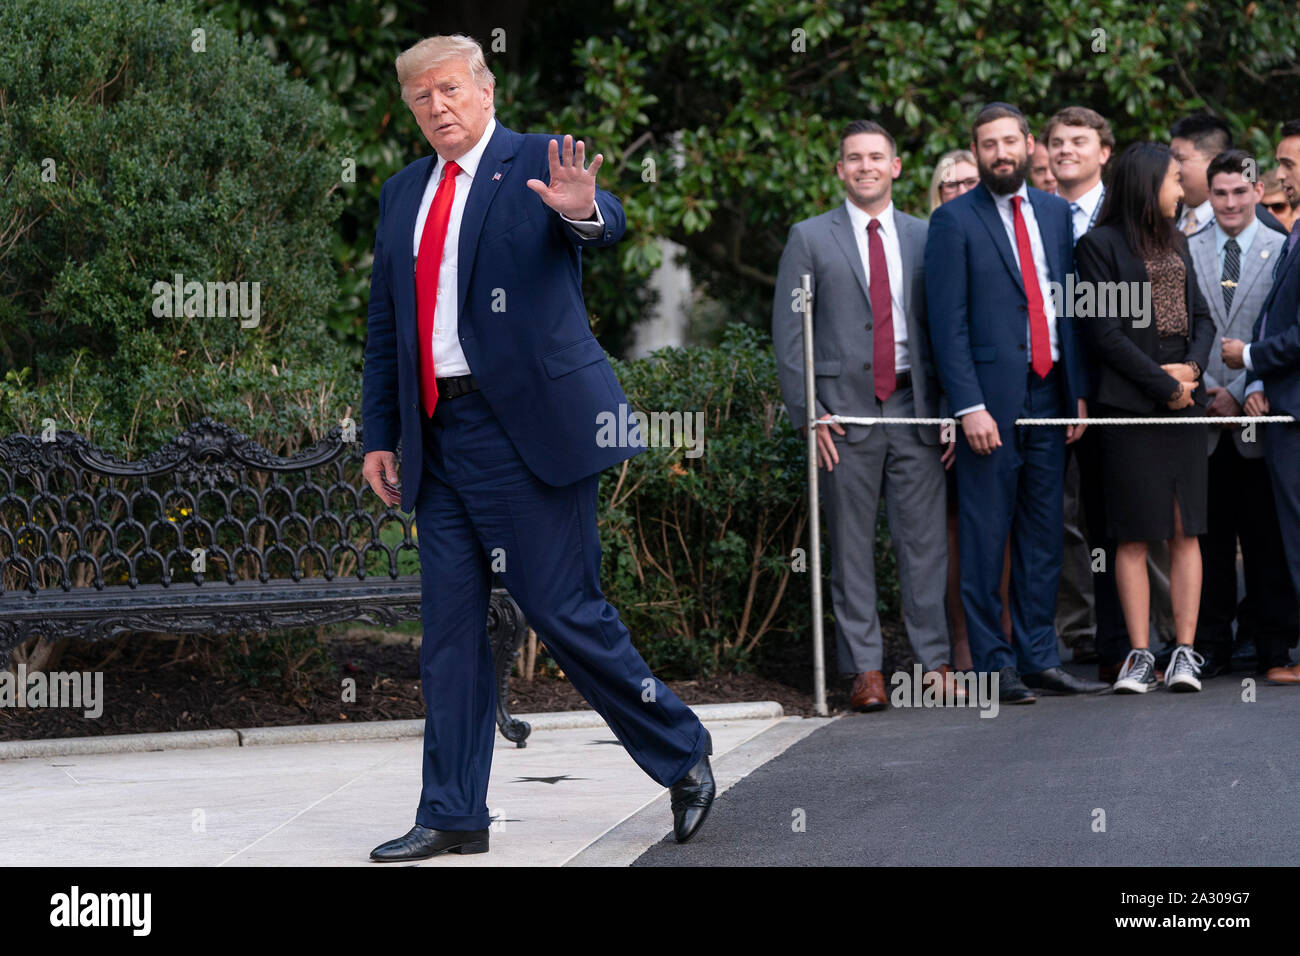 United States President Donald J. Trump waves to the media as he returns to the White House in Washington, DC after signing an executive order in The Villages, Florida 'Protecting and Improving Medicare' for senior citizens on Thursday, October 3, 2019.Credit: Chris Kleponis/Pool via CNP /MediaPunch Stock Photo